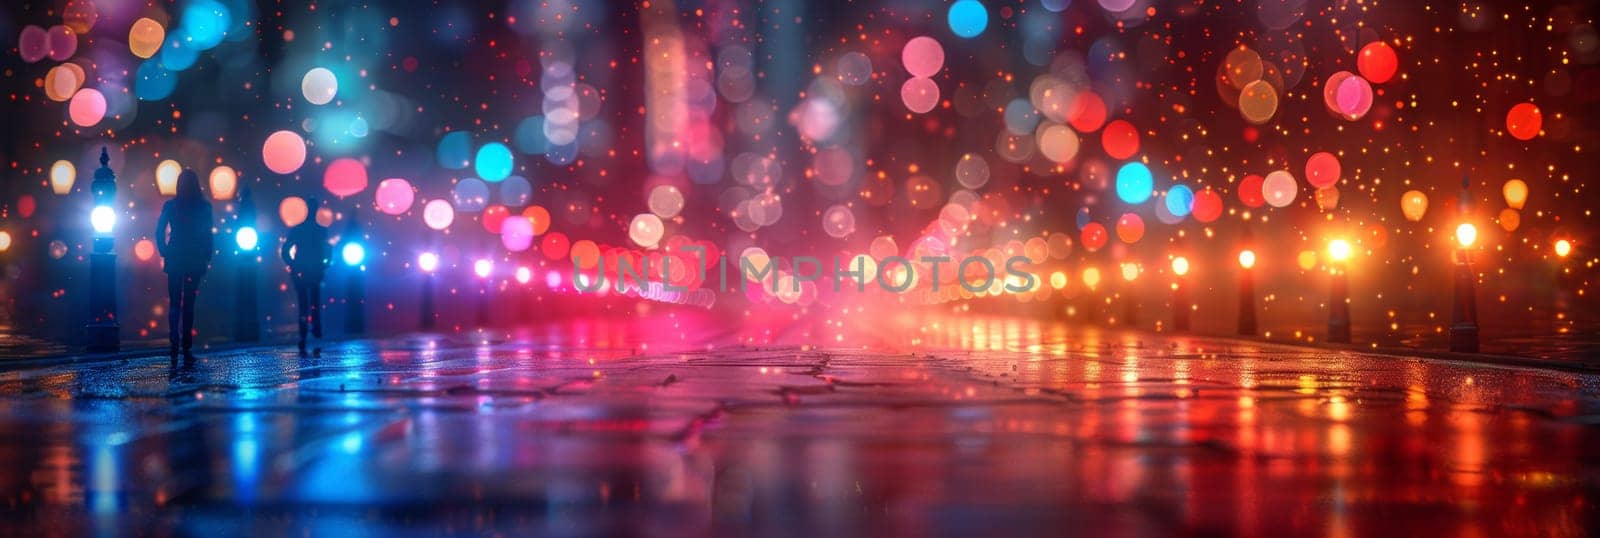 A street with lights and colorful bokeh in the background